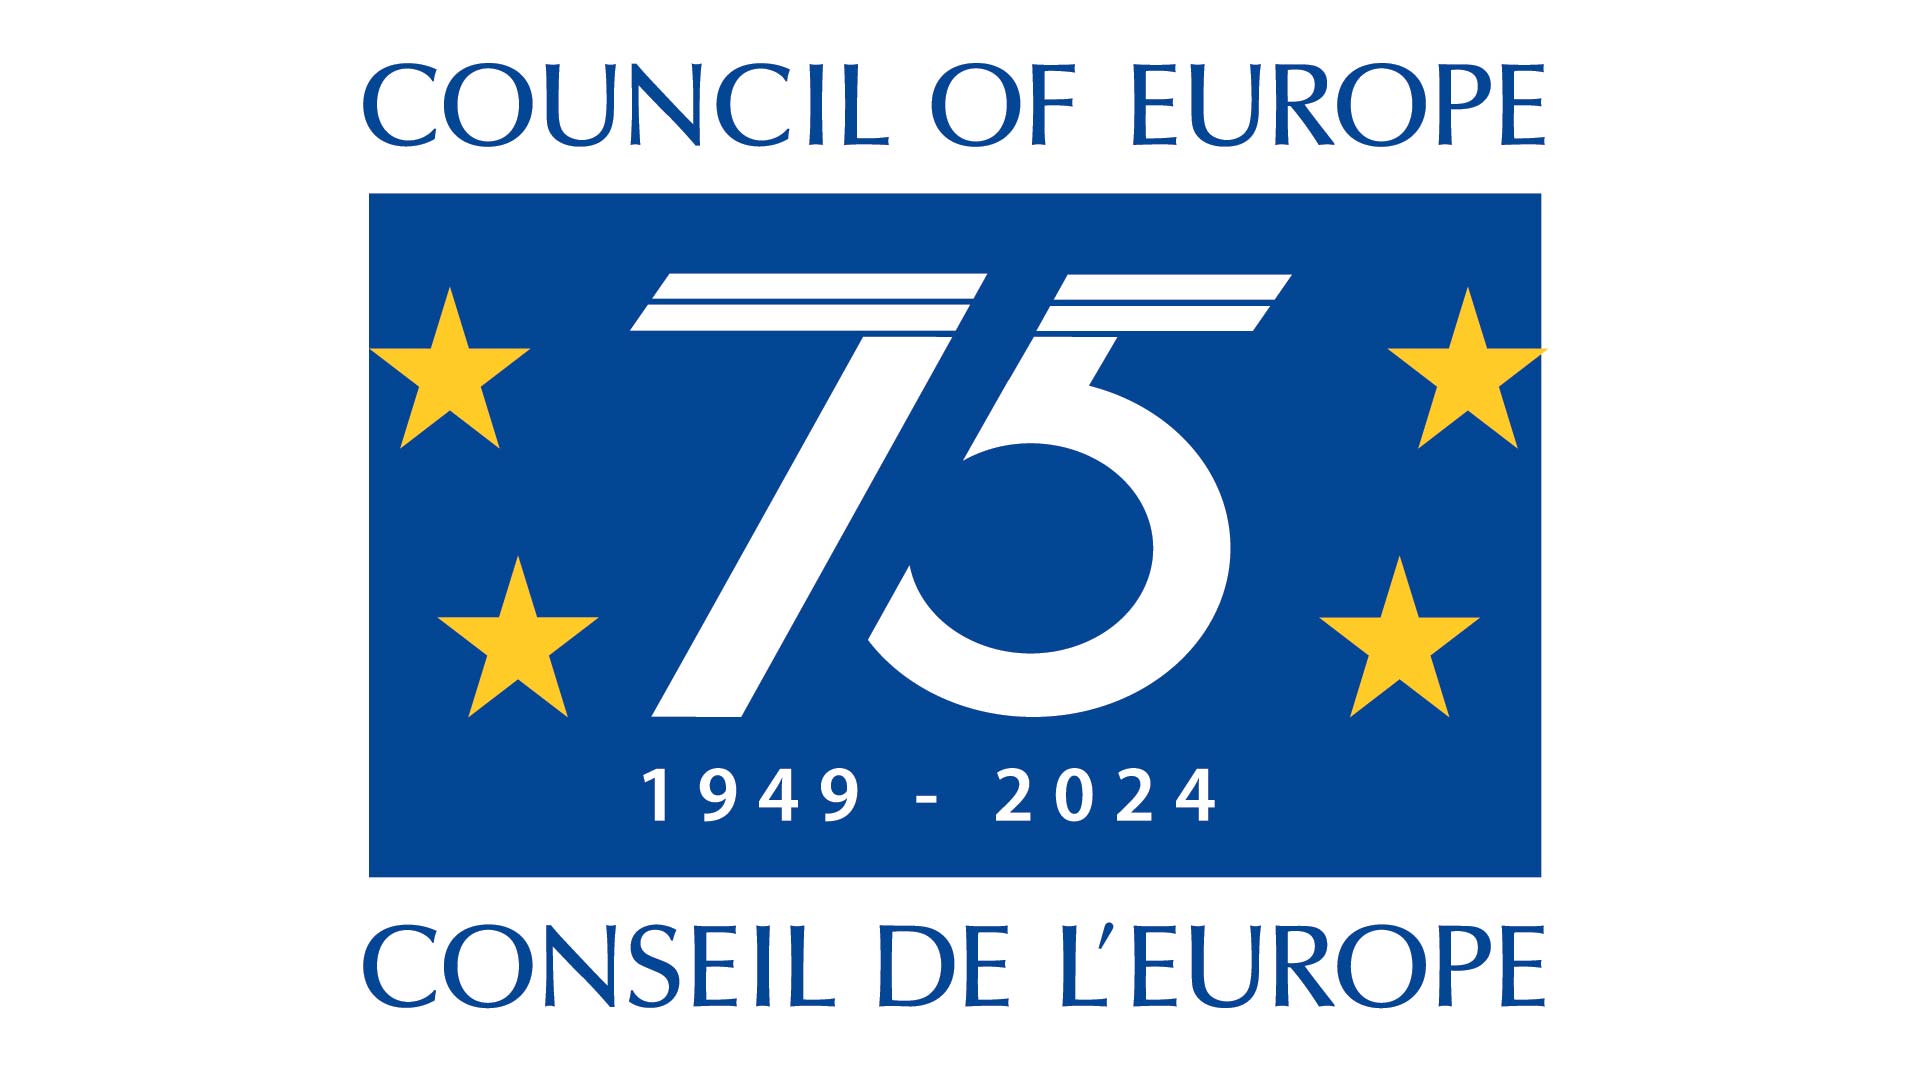 75th anniversary year for the Council of Europe